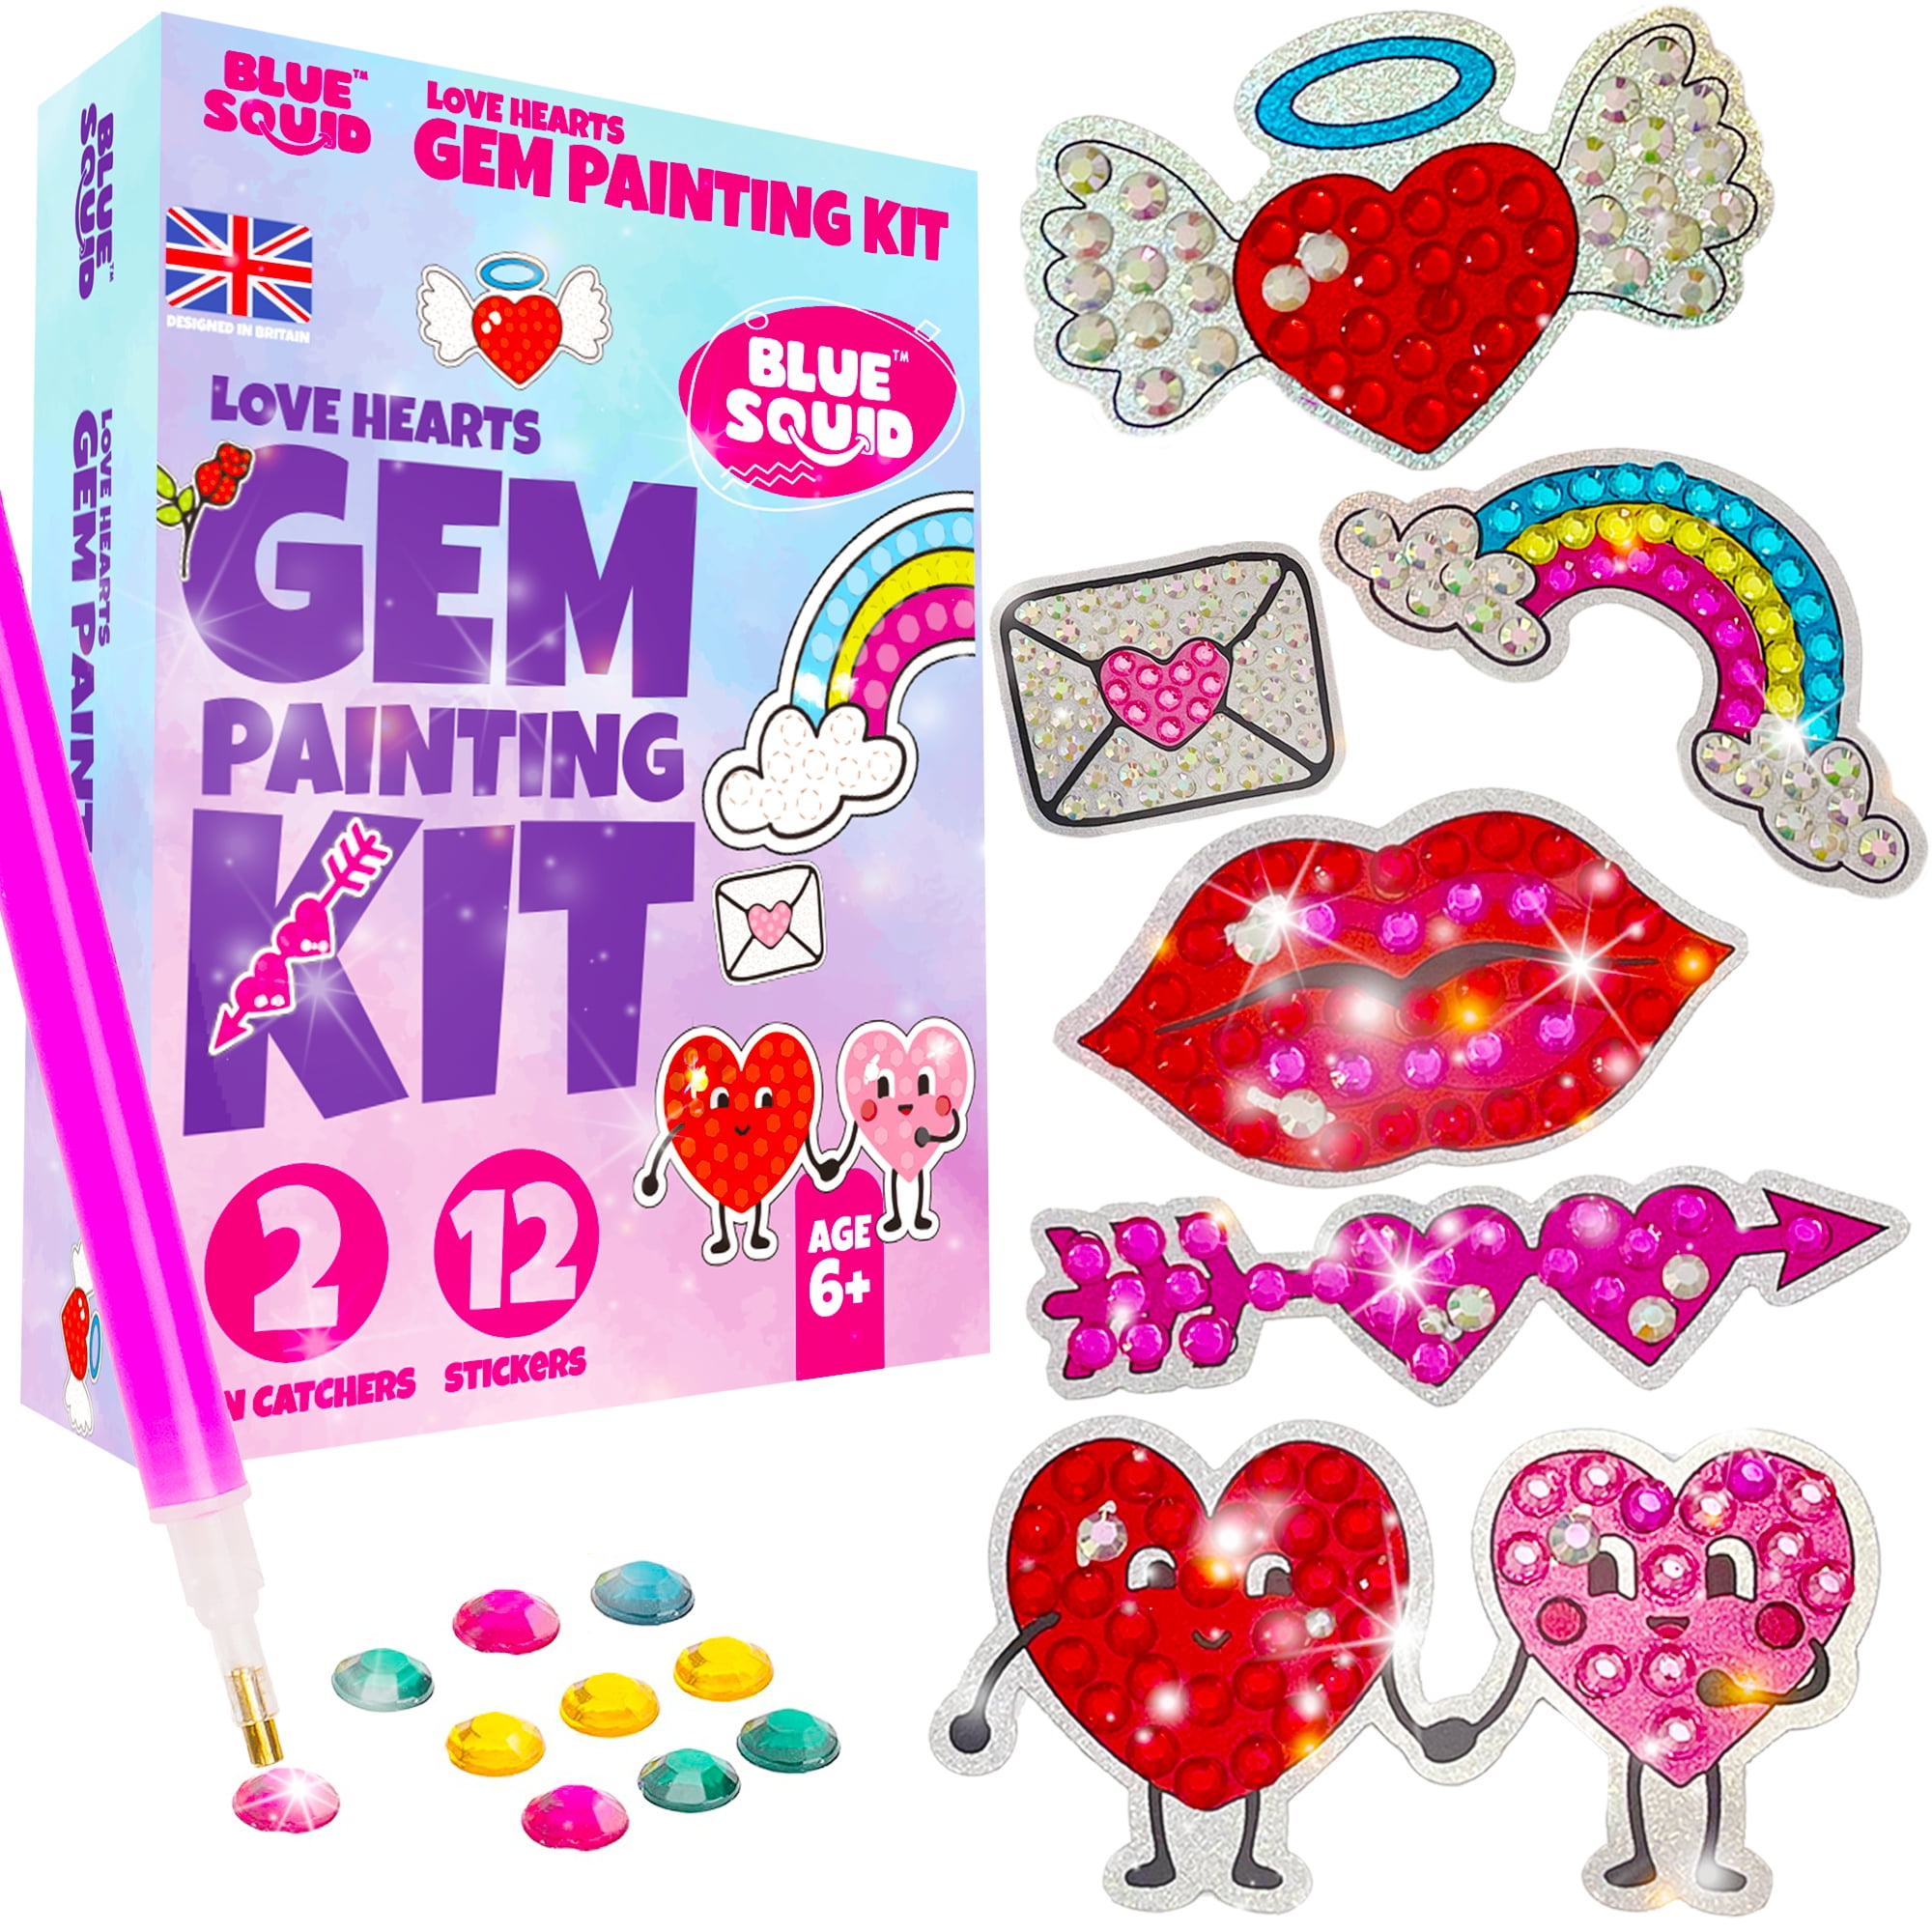 Blue Squid Gem Art Painting Kit Arts and Crafts Gems Diamond Art Love Heart  Kids with Stickers, Keychains 1500+ Pieces Gift Set 